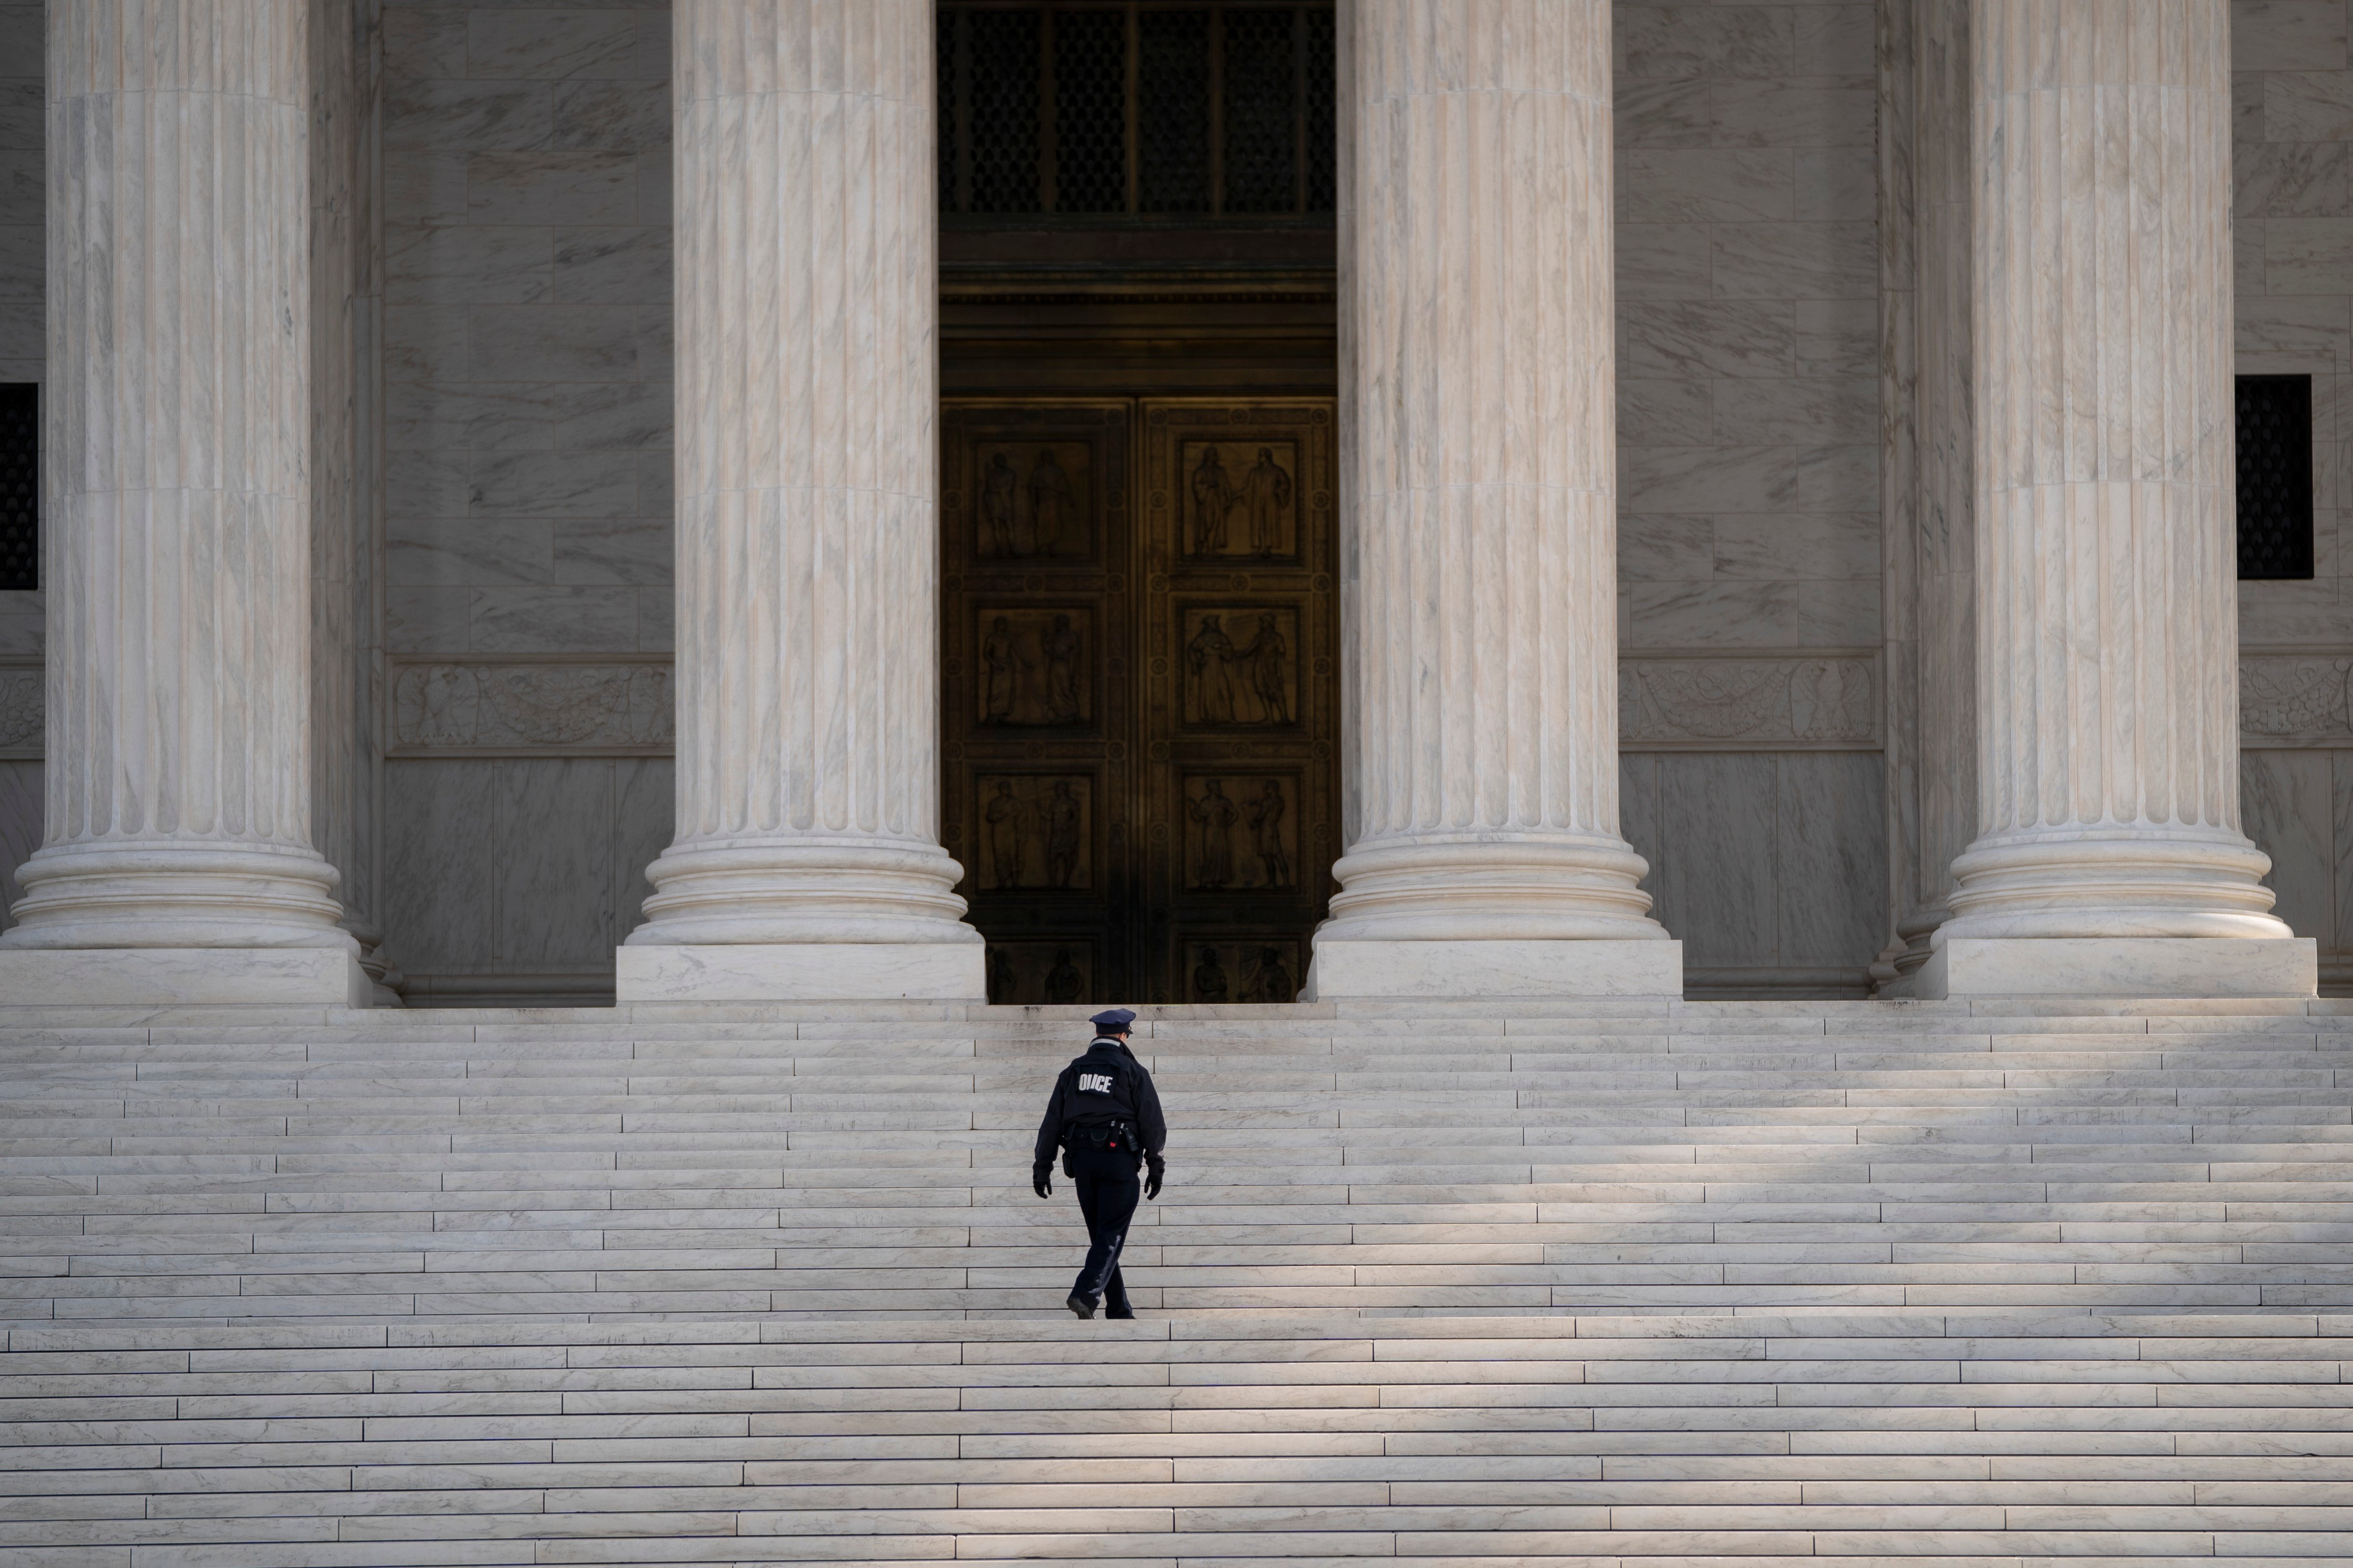 A Supreme Court police officer walks up the steps at the U.S. Supreme Court on March 16, 2020 in Washington, DC. (Photo by Drew Angerer—Getty Images)